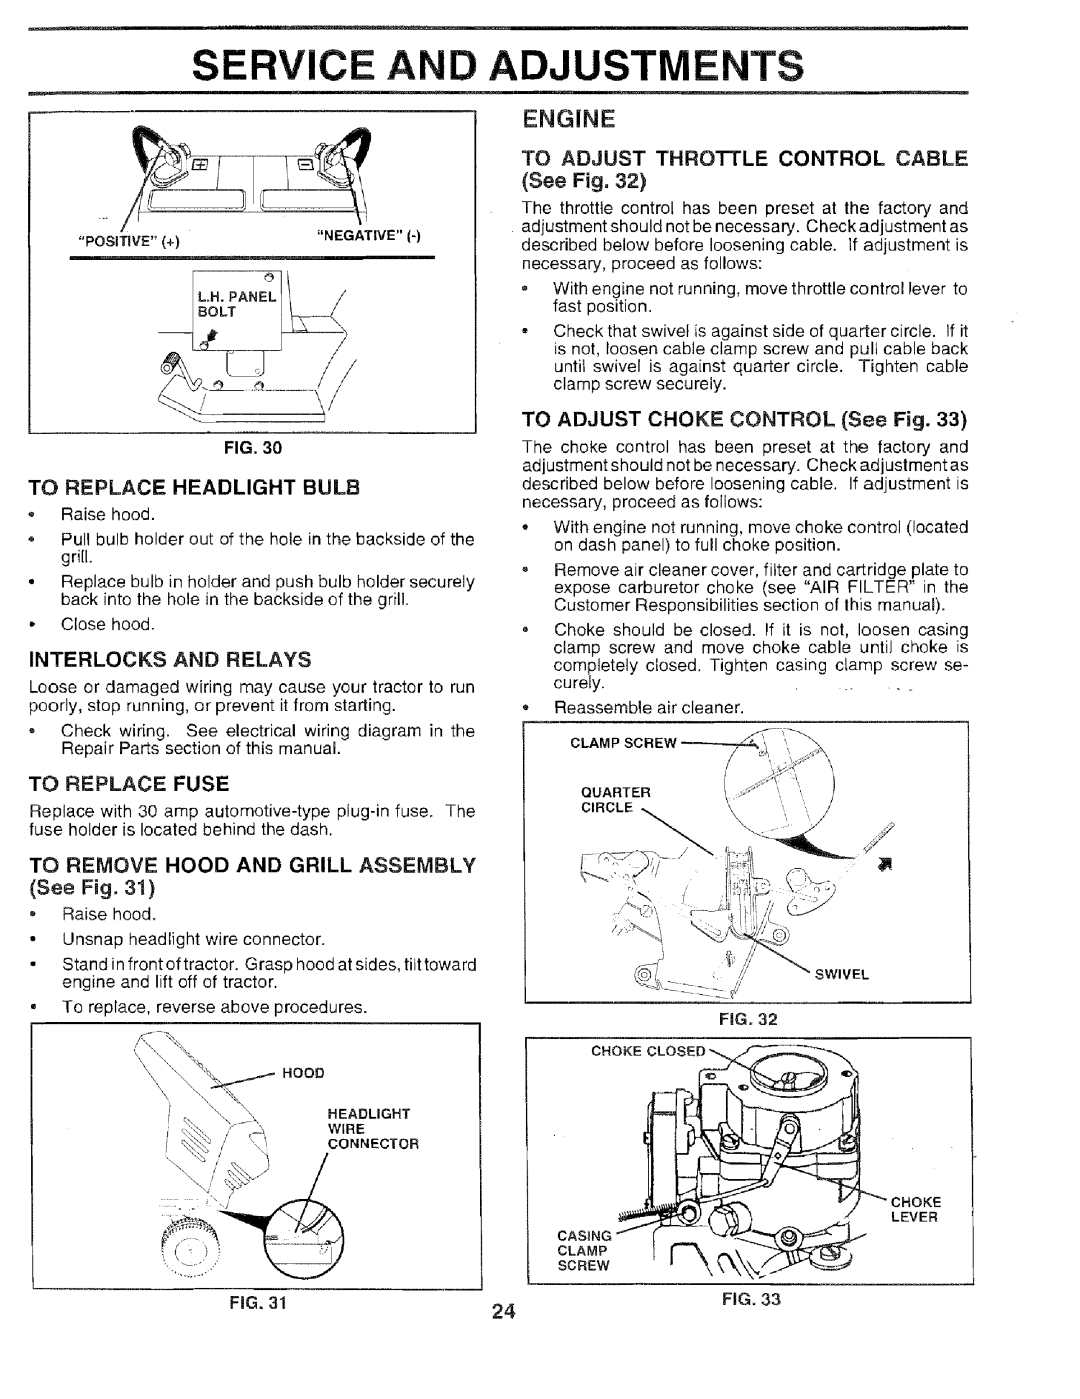 Sears 917.259567 Ervice And, Adjustments, Casingi, Engine, To Replace Headlight Bulb, Interlocks And Relays, See Fig 